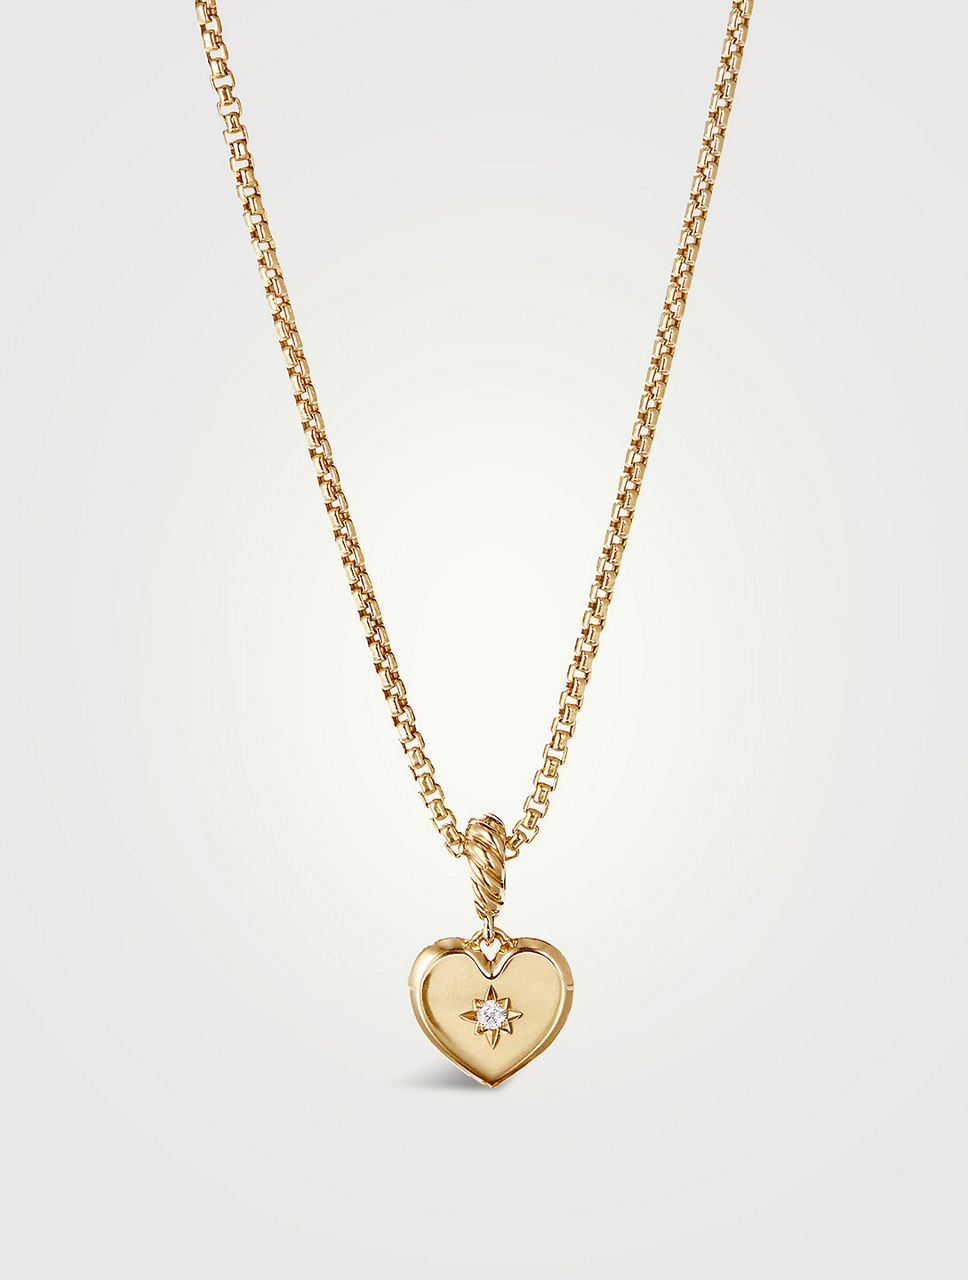 Compass Heart Amulet In 18k Yellow Gold With Center Diamond